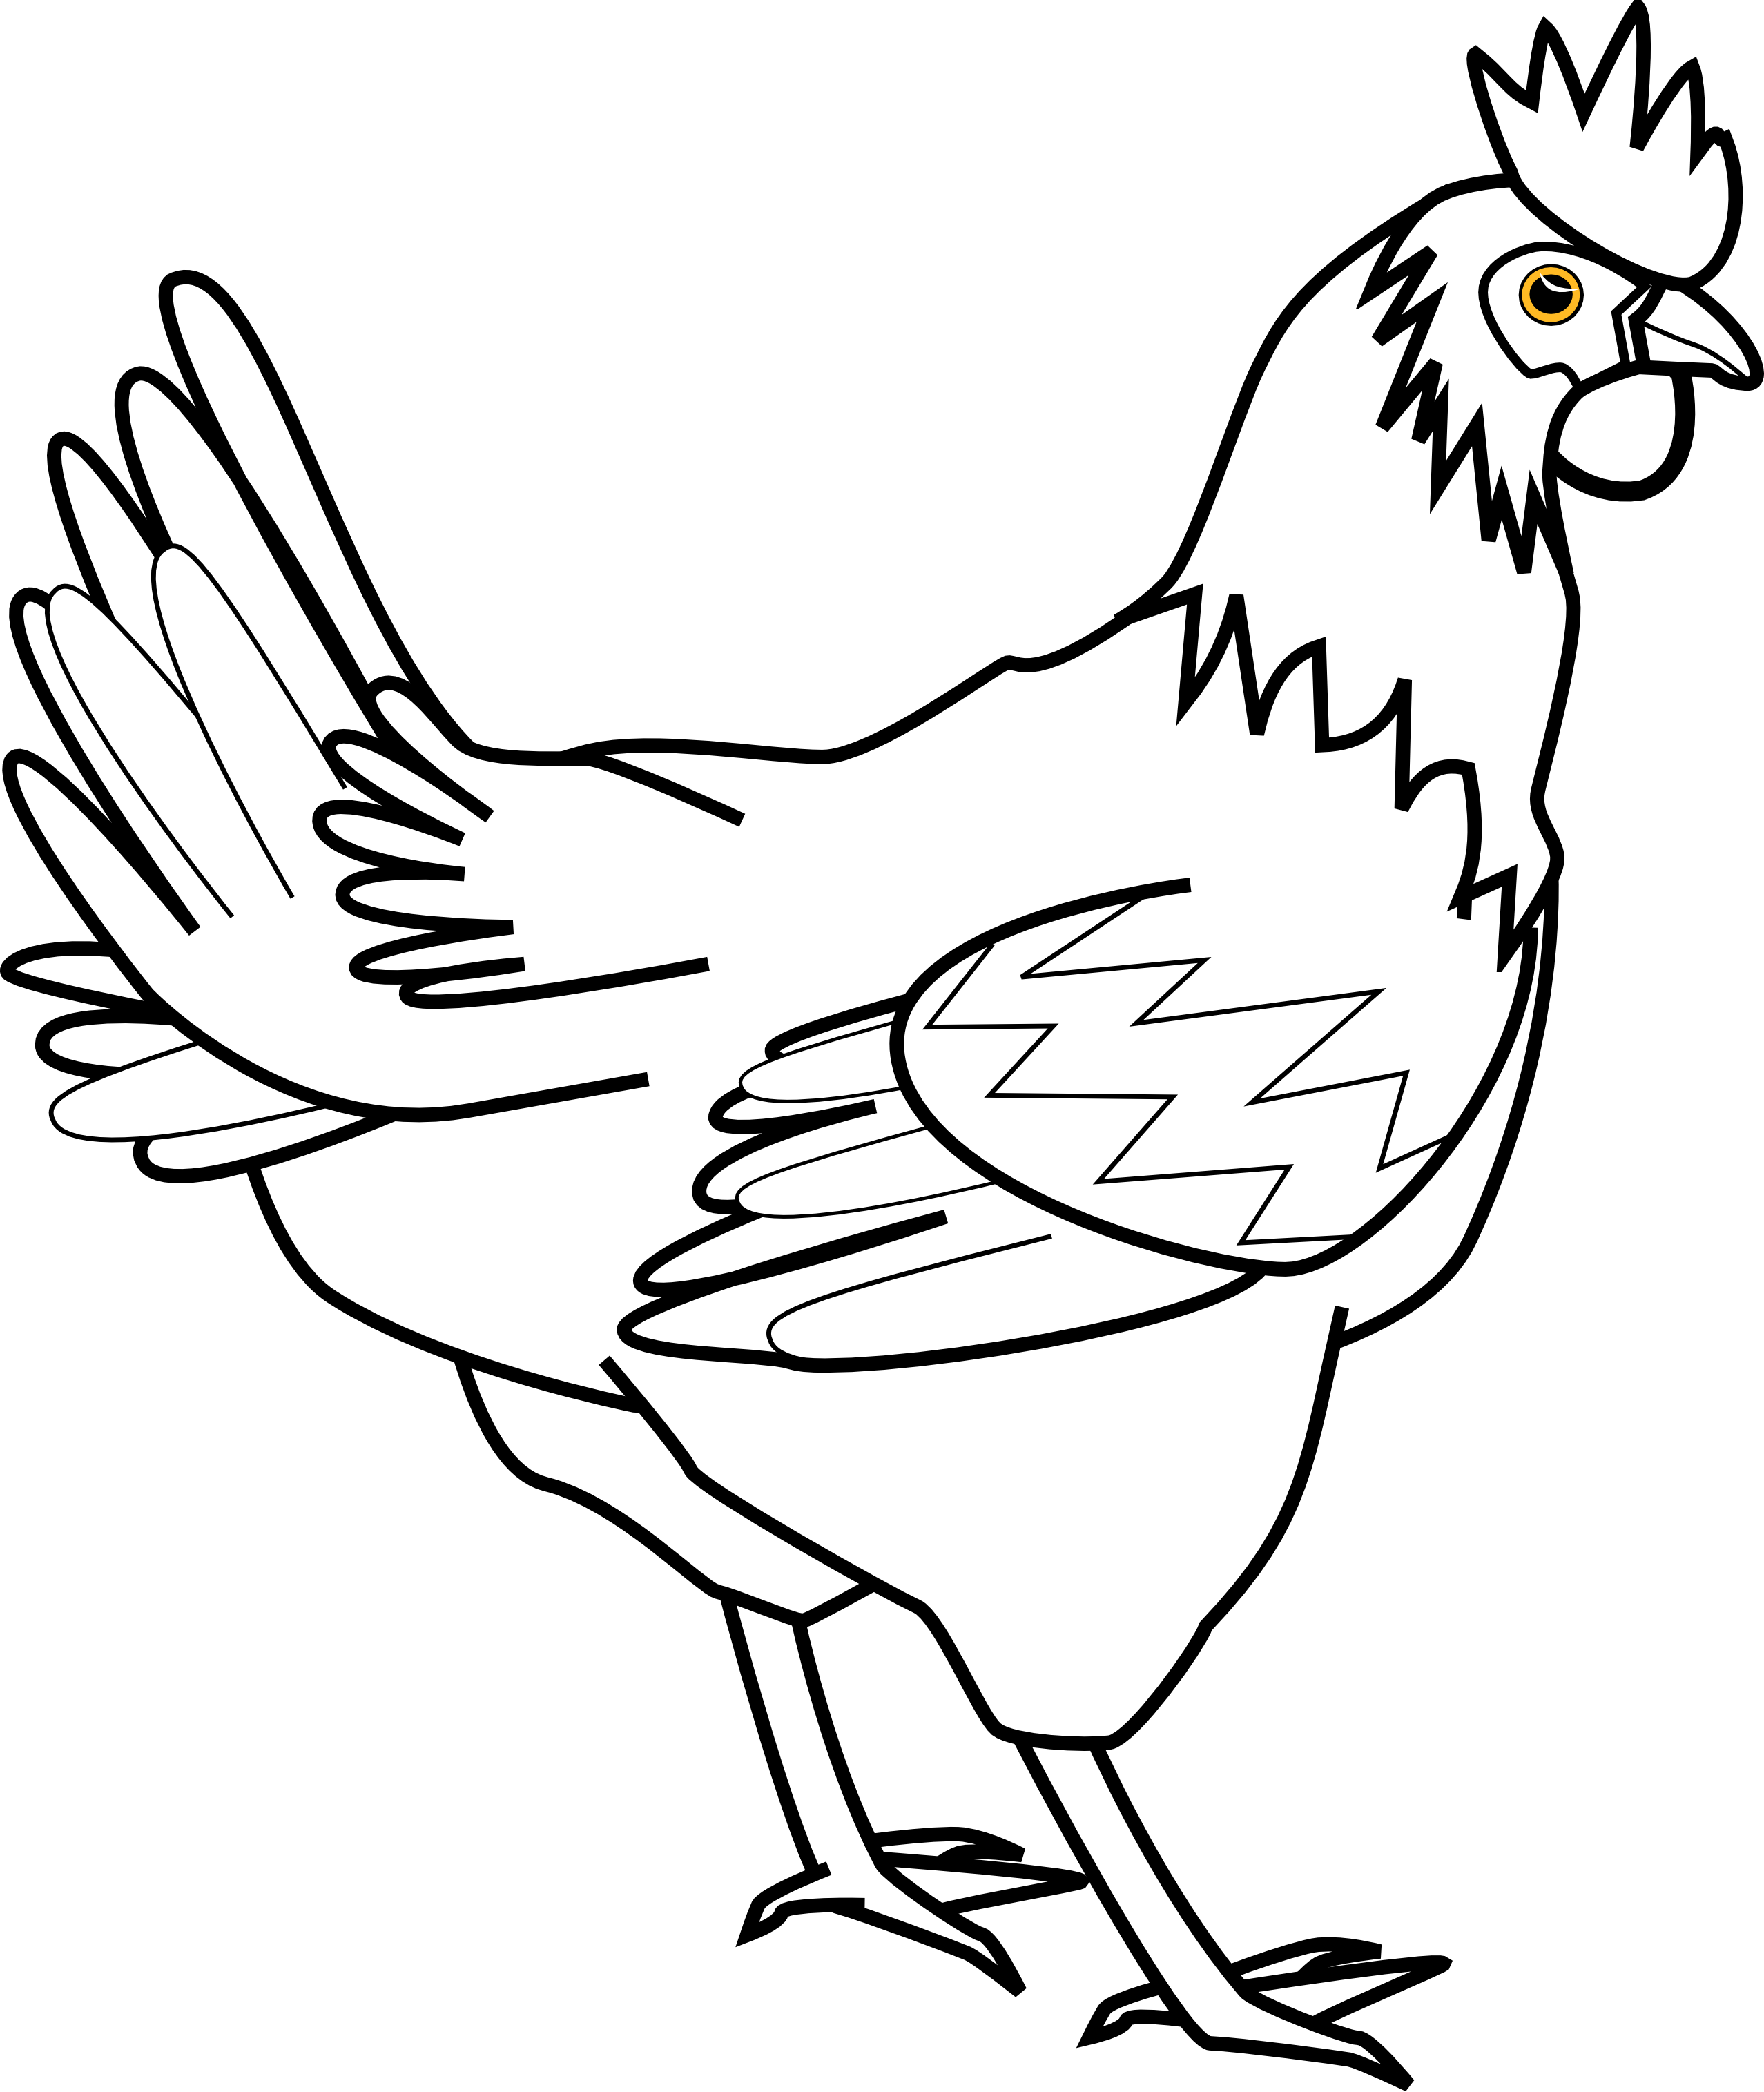 Rooster Clipart Black And White | Clipart Panda - Free Clipart Images